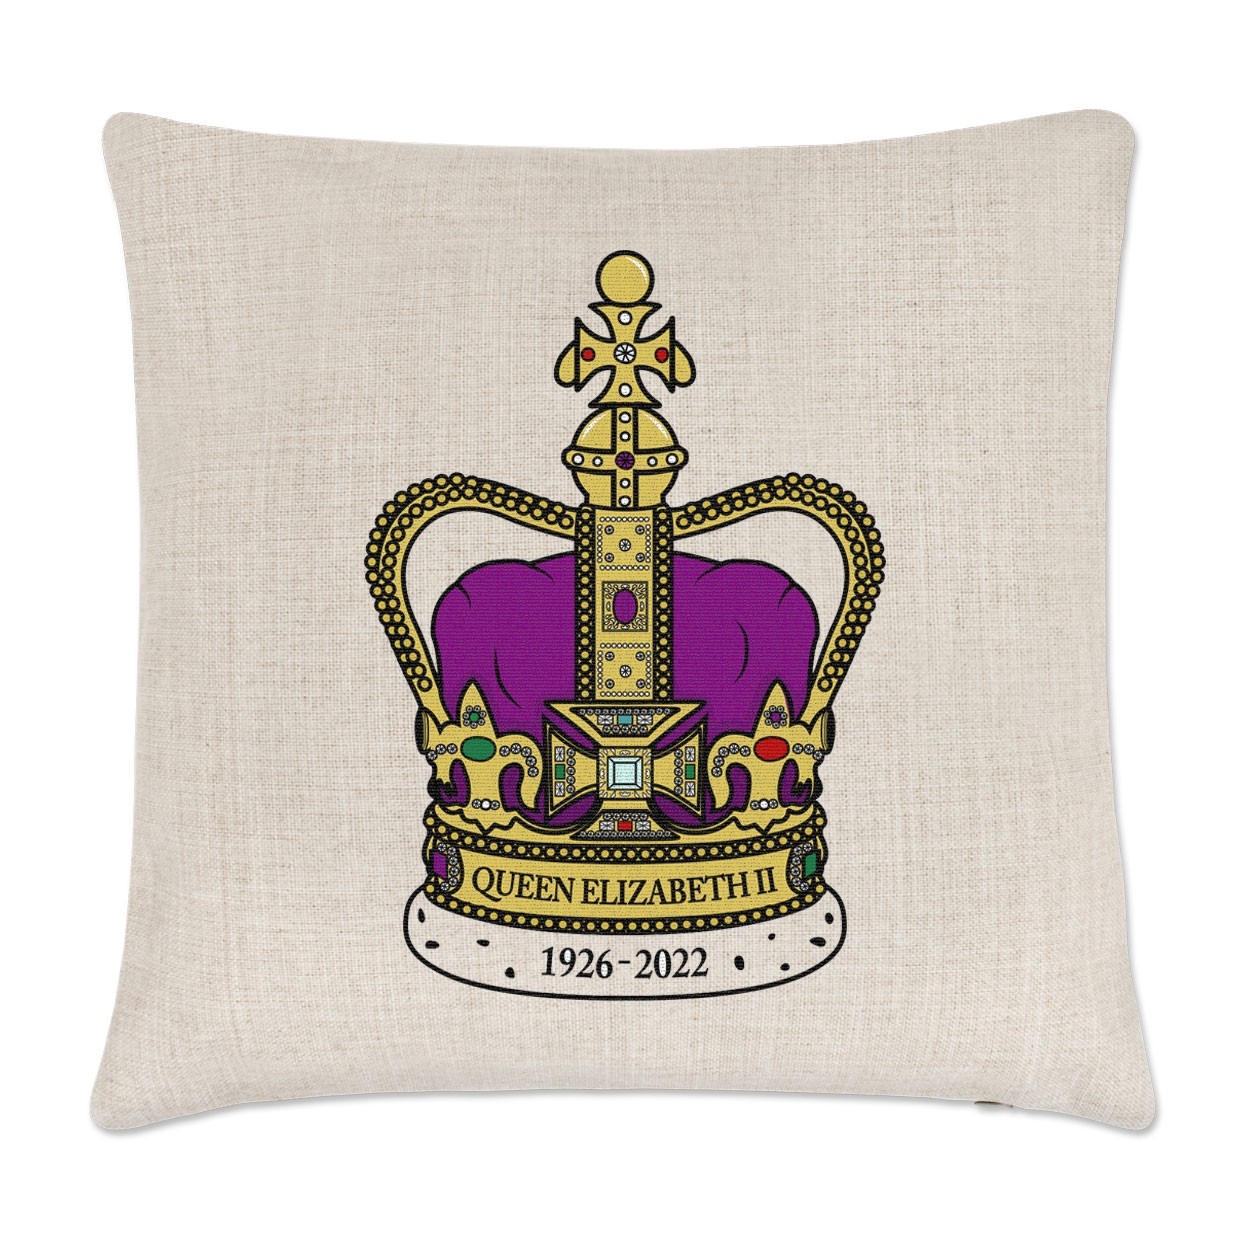 Gold Crown Queen Elizabeth II 1926 - 2022 Cushion Cover Commemorative Gift Her Majesty